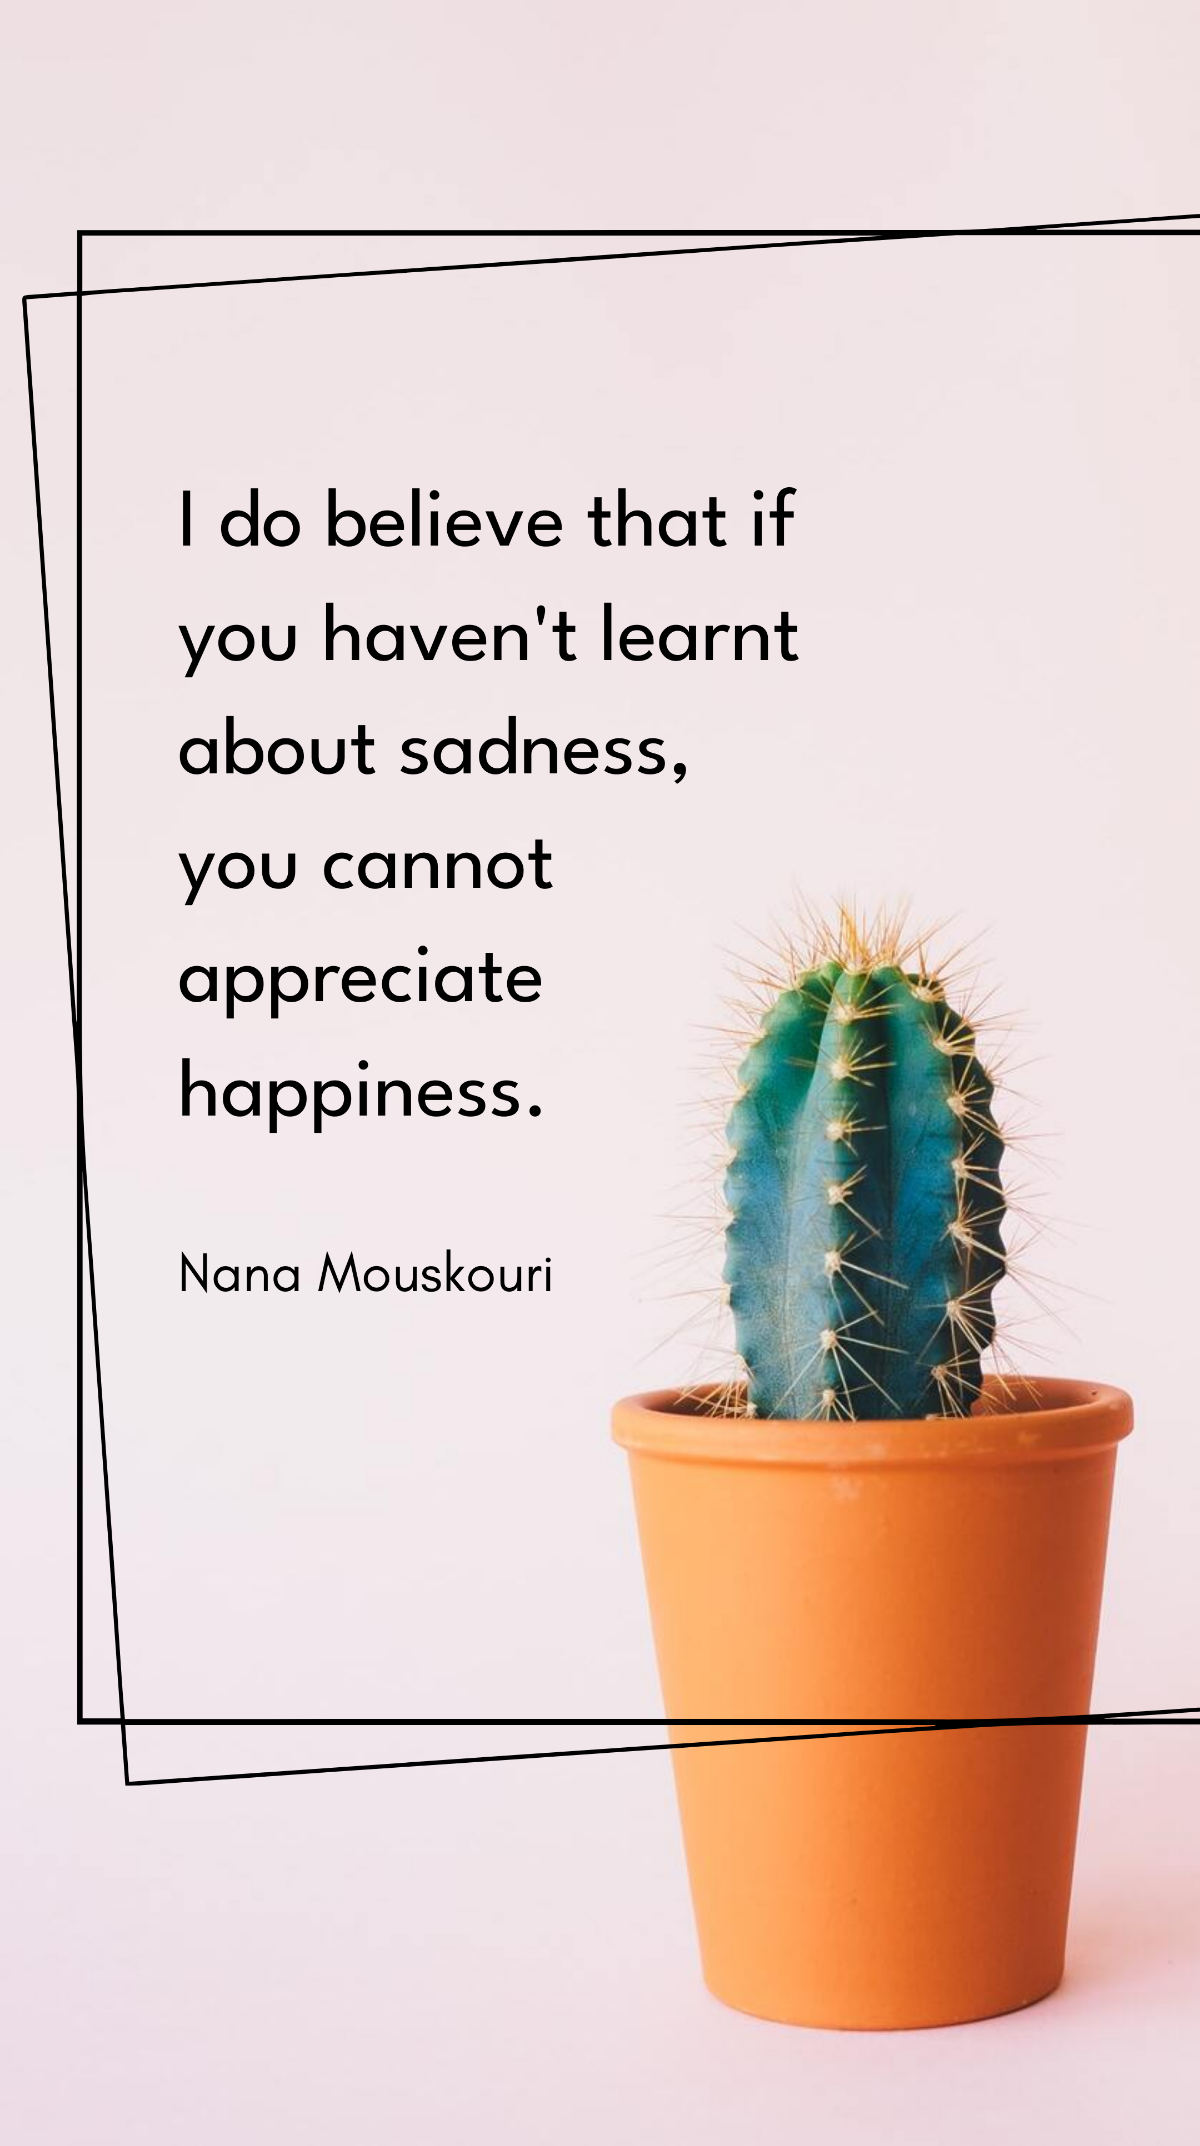 Nana Mouskouri - I do believe that if you haven't learnt about sadness, you cannot appreciate happiness. Template